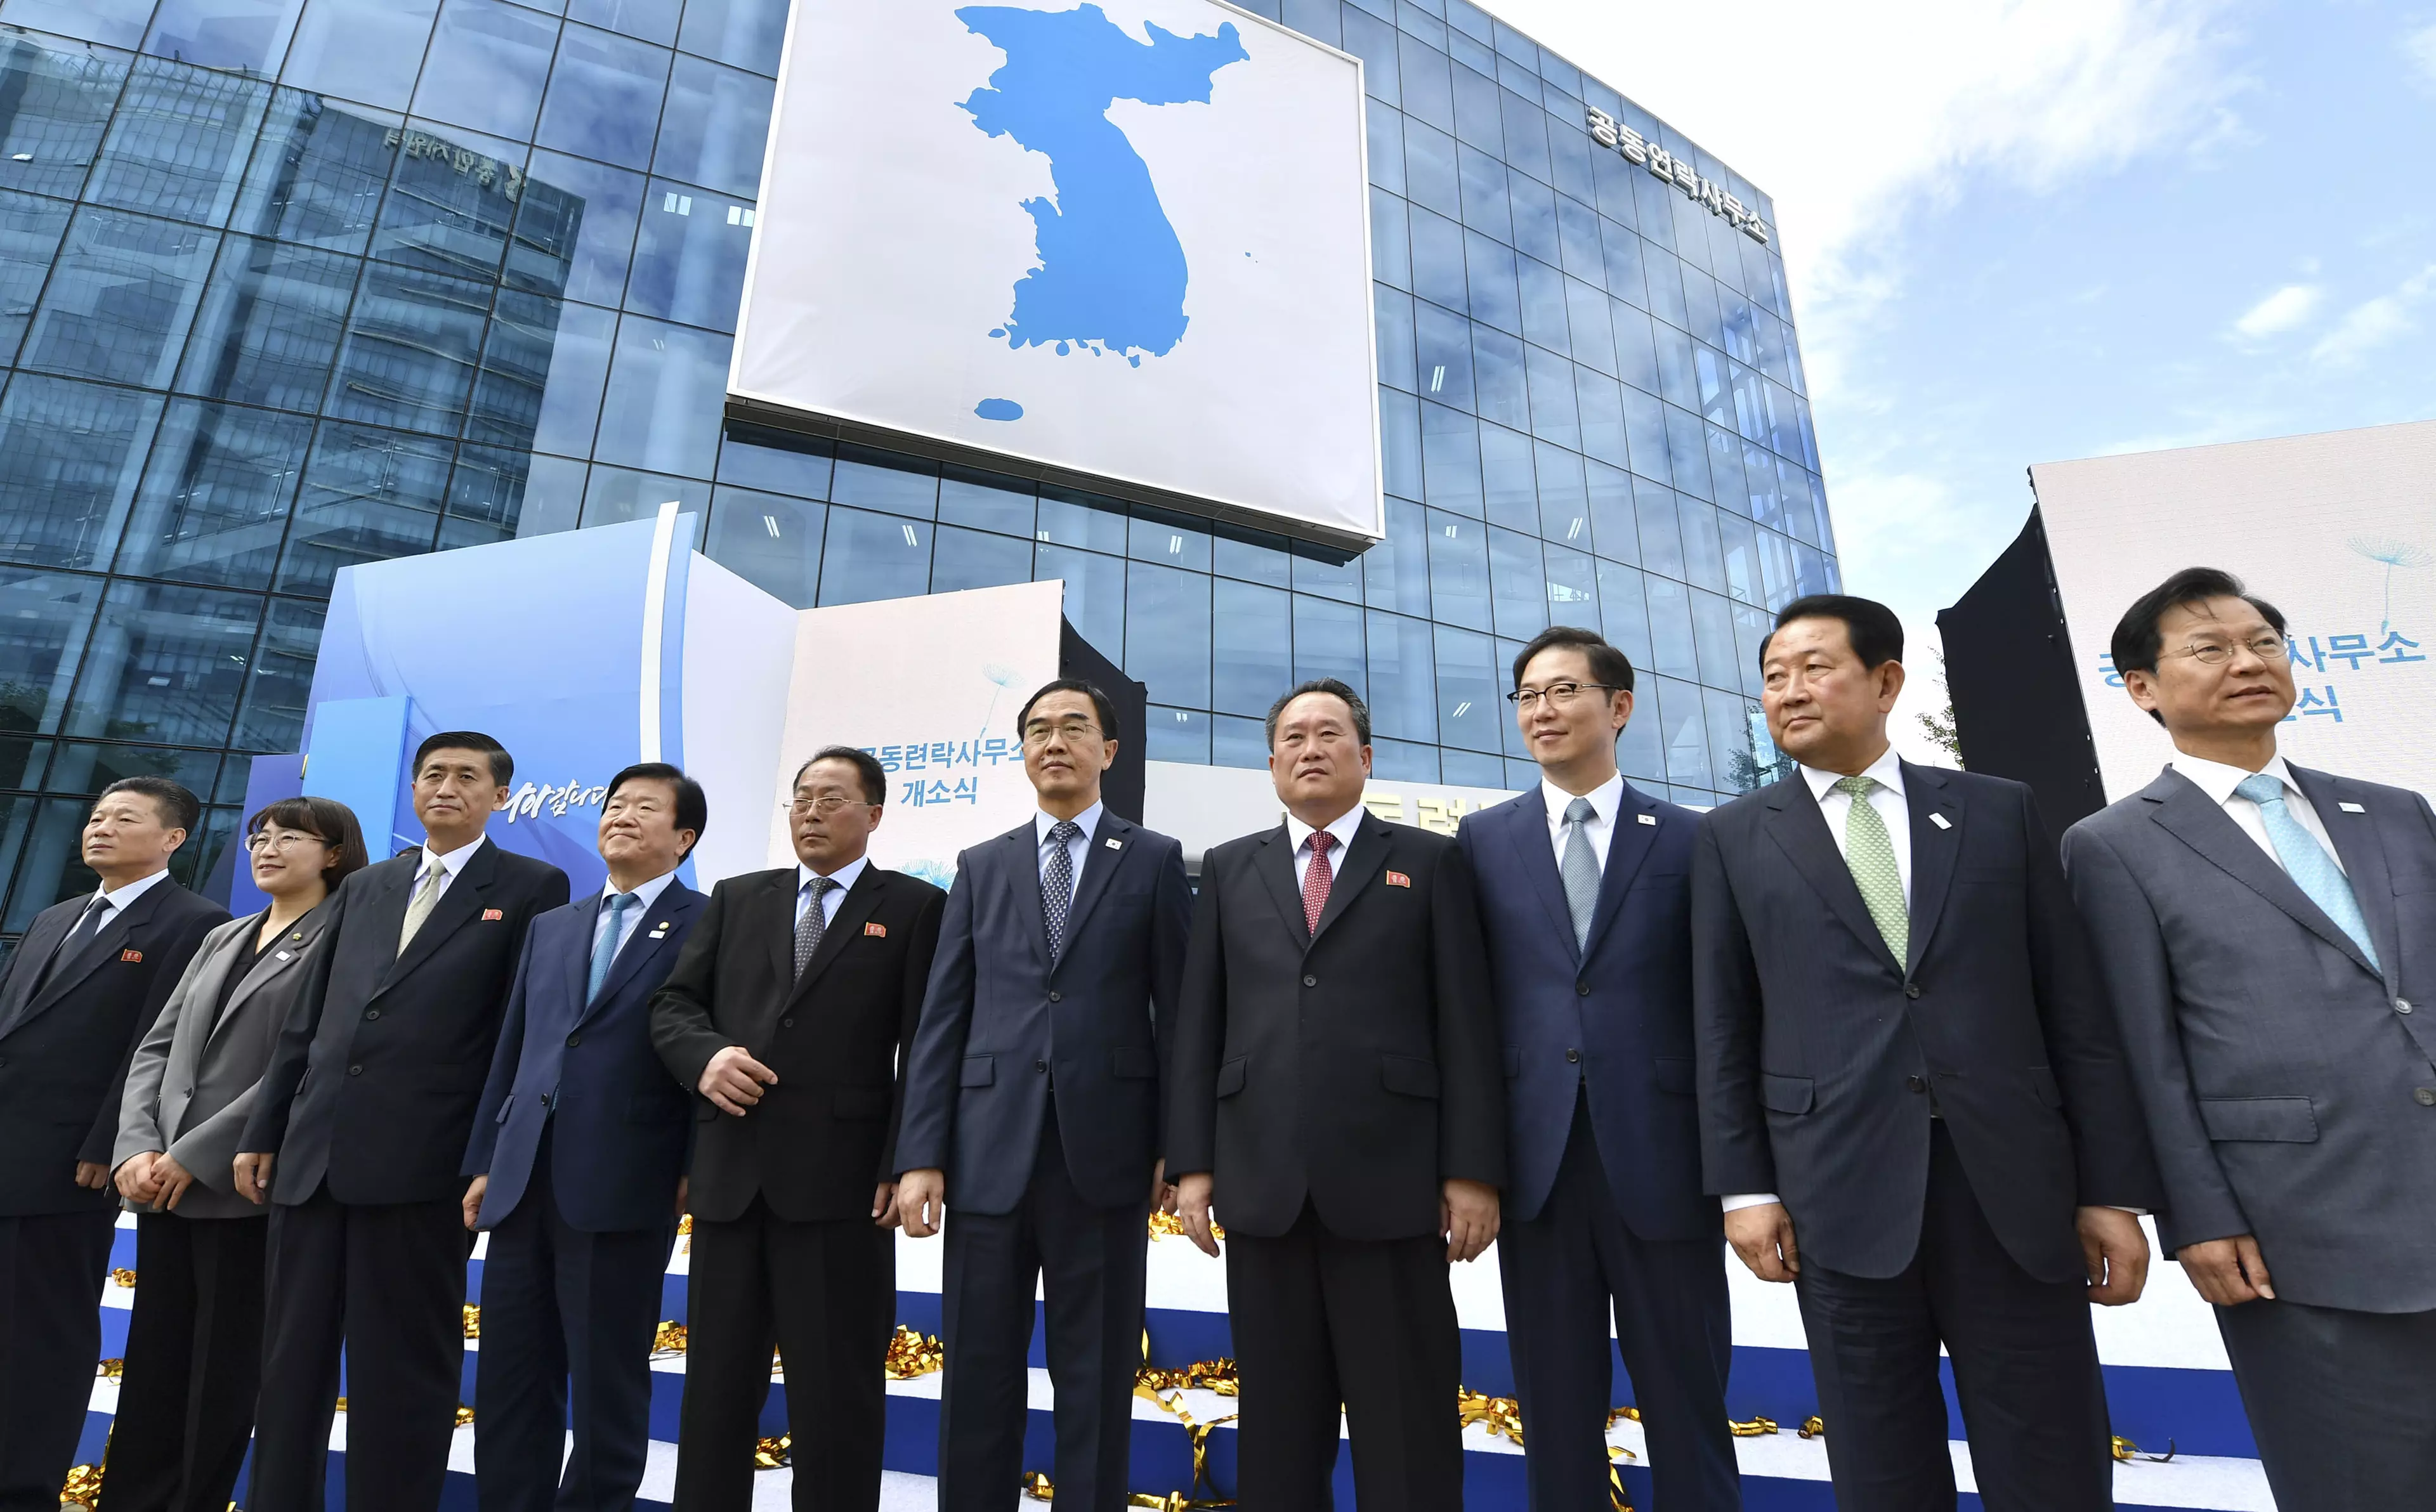 North and South Korean ministers attended the open ceremony for the inter-Korean liaison office in September 2018.